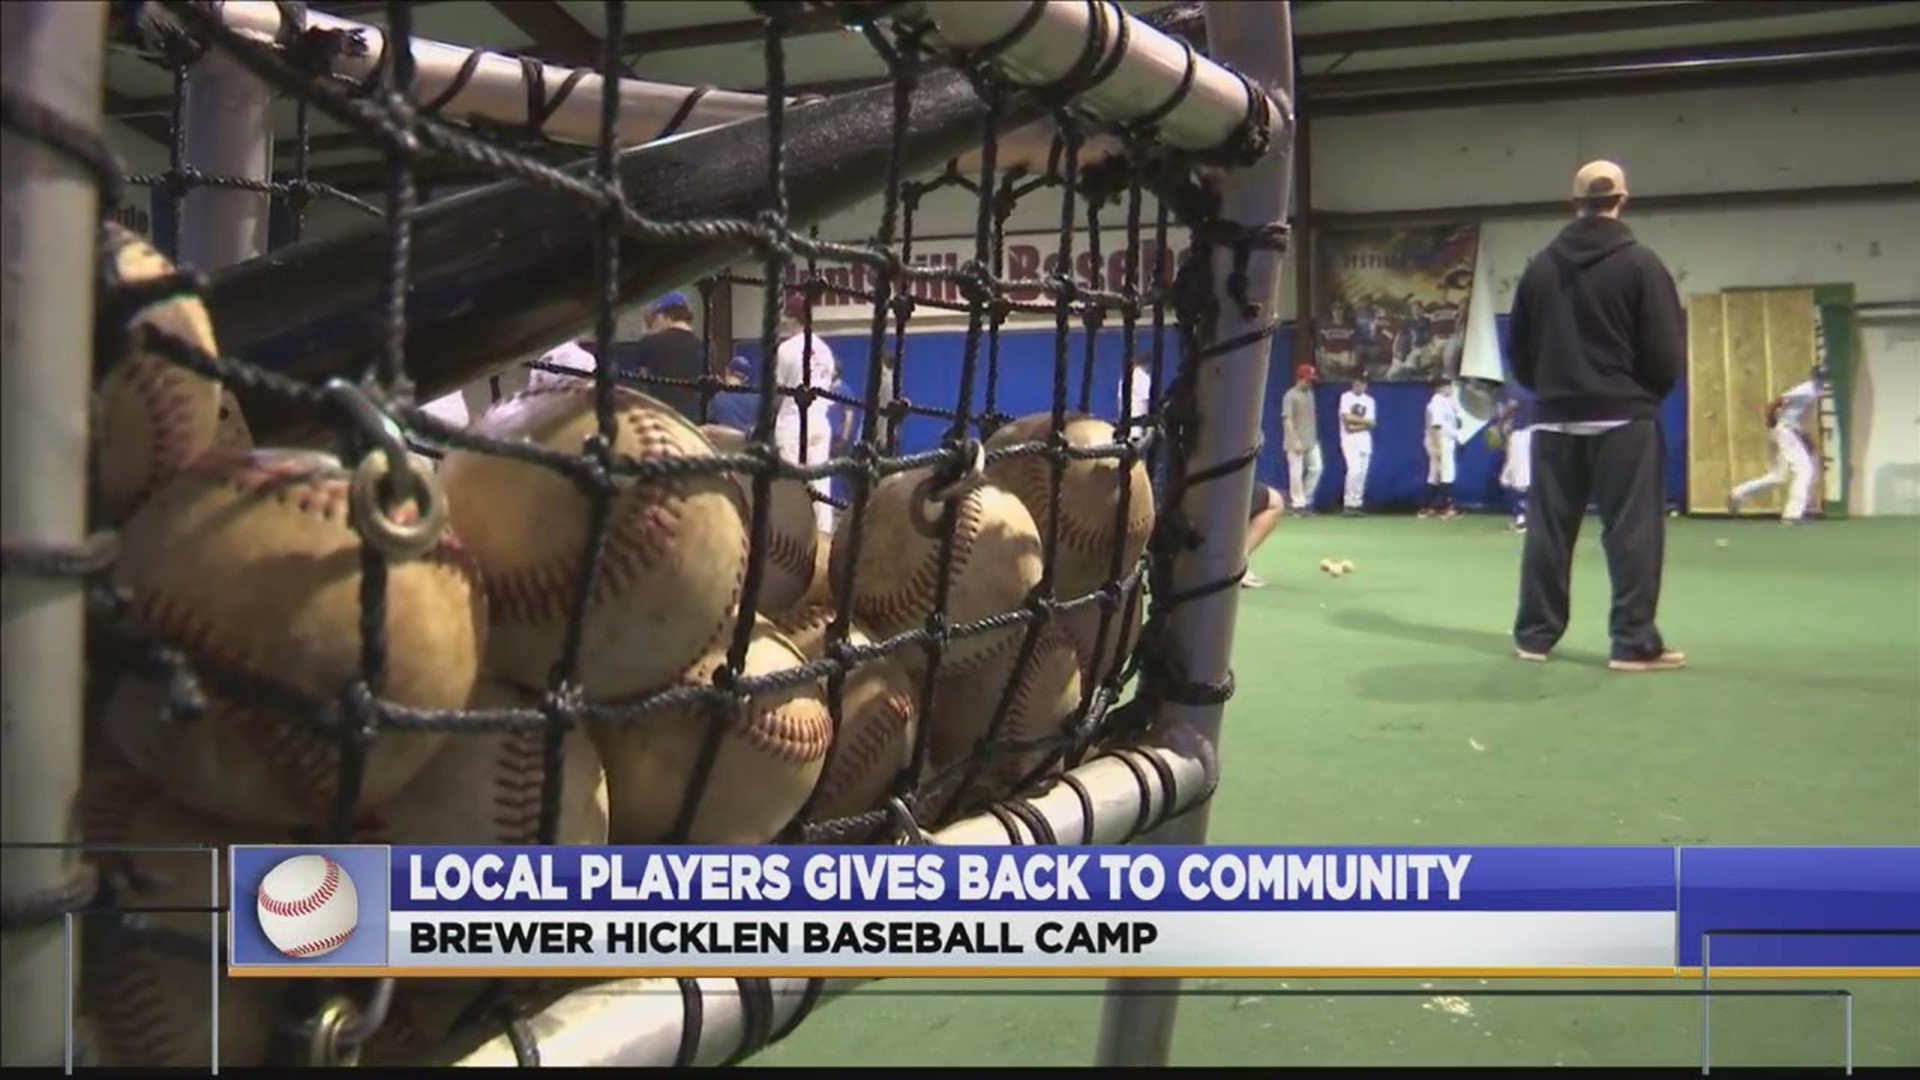 Brewer Hicklen plays under the Kansas City Royals Organization. He held his annual youth baseball camp Saturday at Huntsville High school.